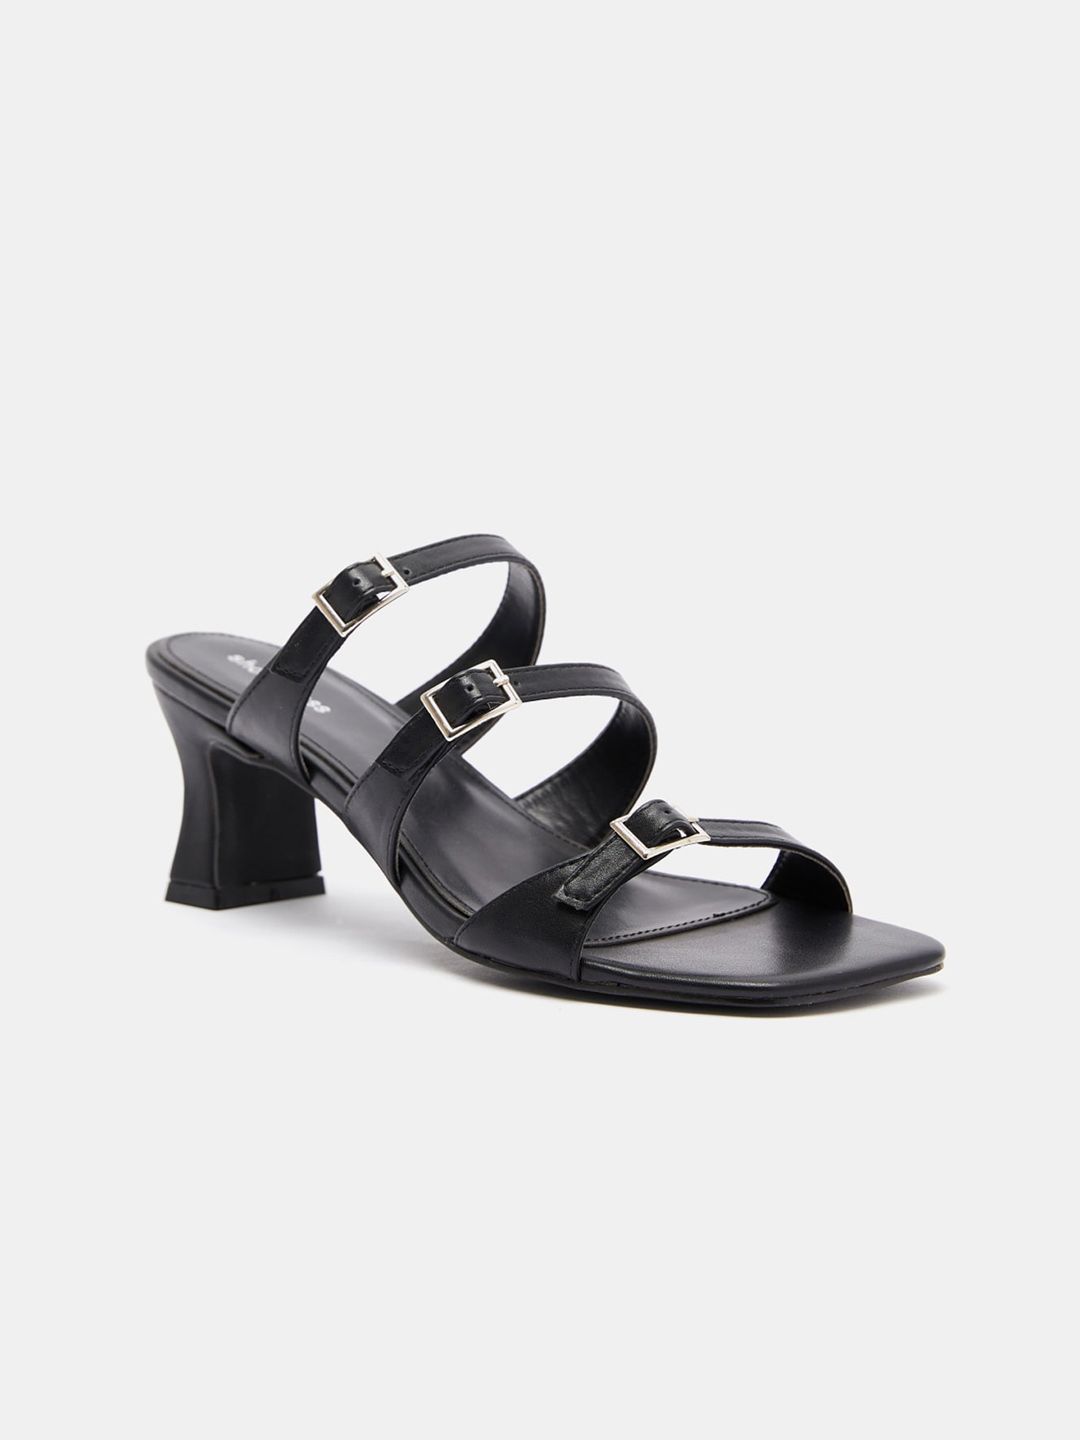 shoexpress Black PU Block Sandals with Buckles Price in India